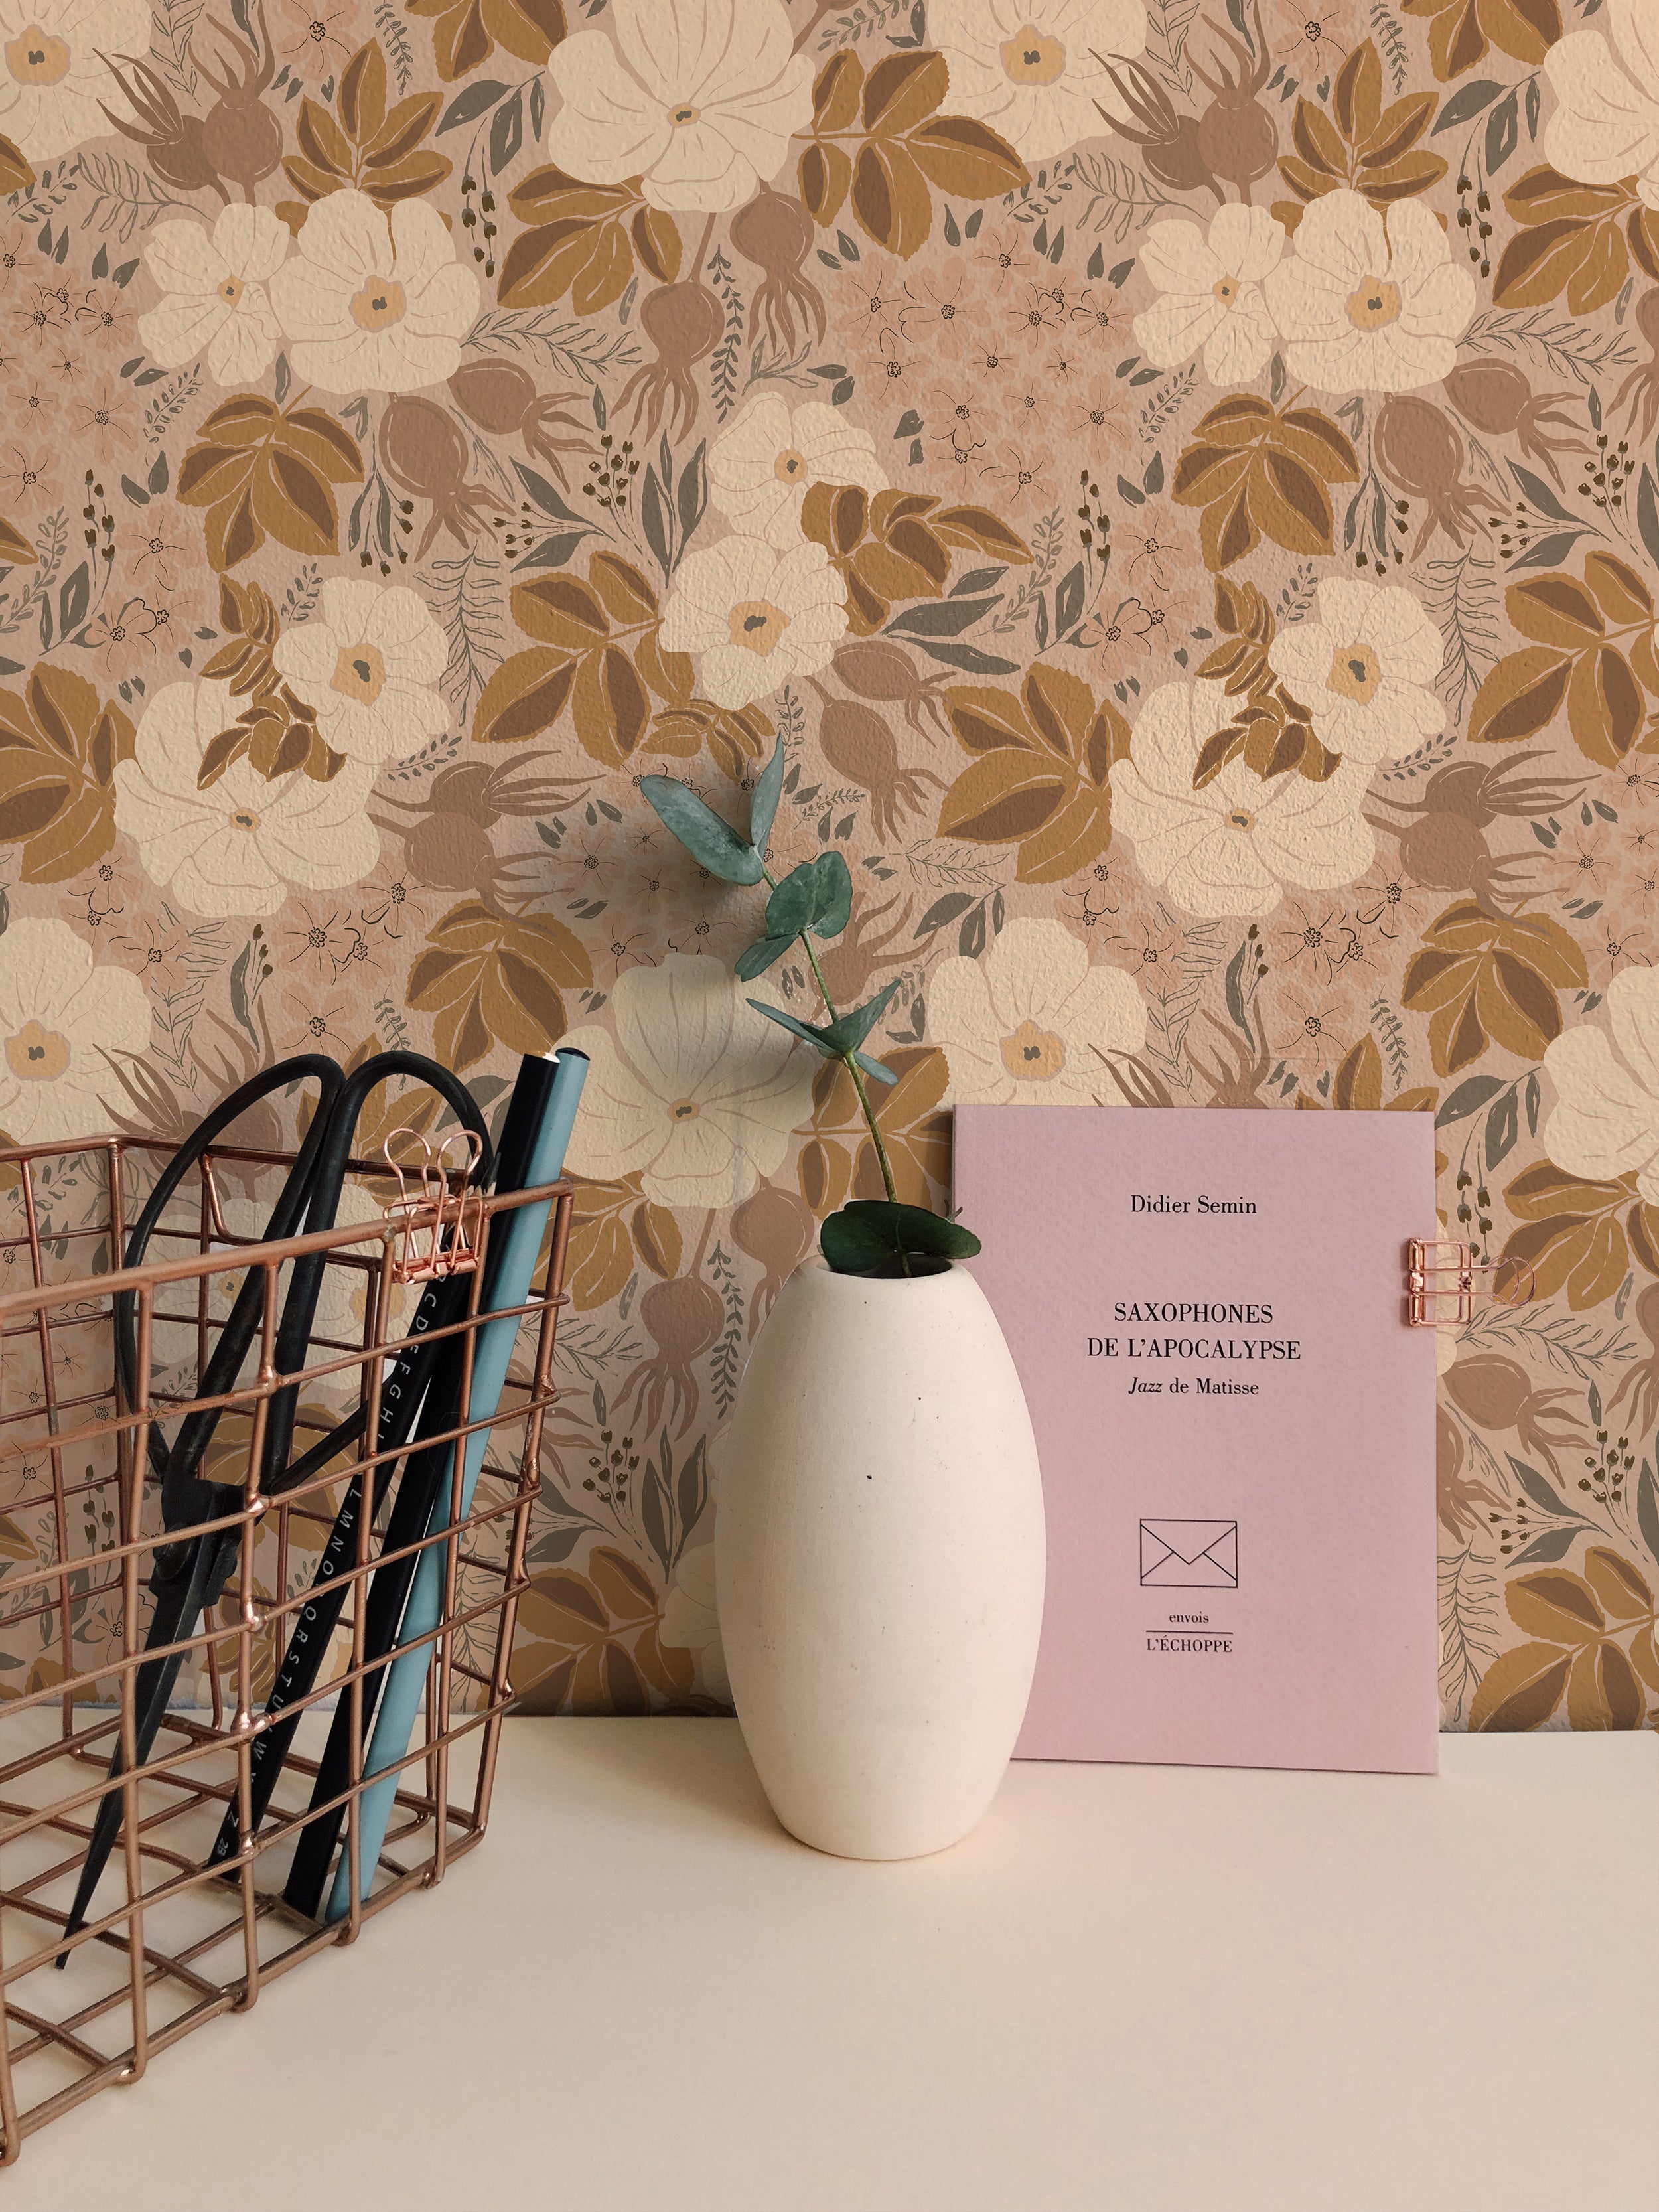 A close-up of the Rosehip Wallpaper showing its intricate pattern of large white flowers, smaller pink blooms, and rich green leaves on a dark background, ideal for adding a touch of nature-inspired elegance to any room.